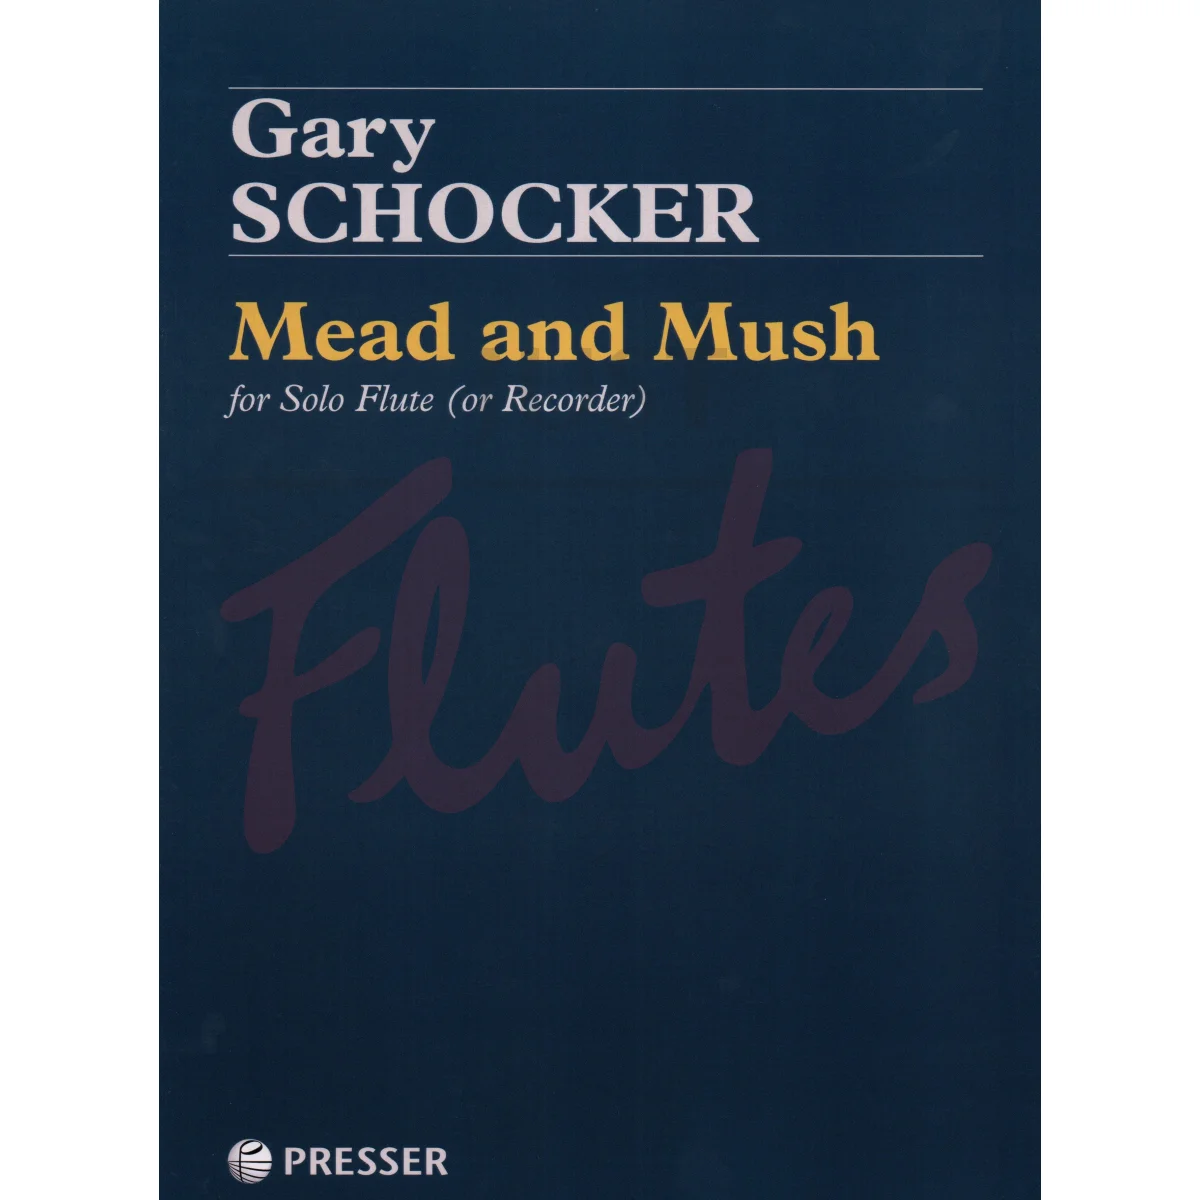 Mead and Mush for Solo Flute or Recorder